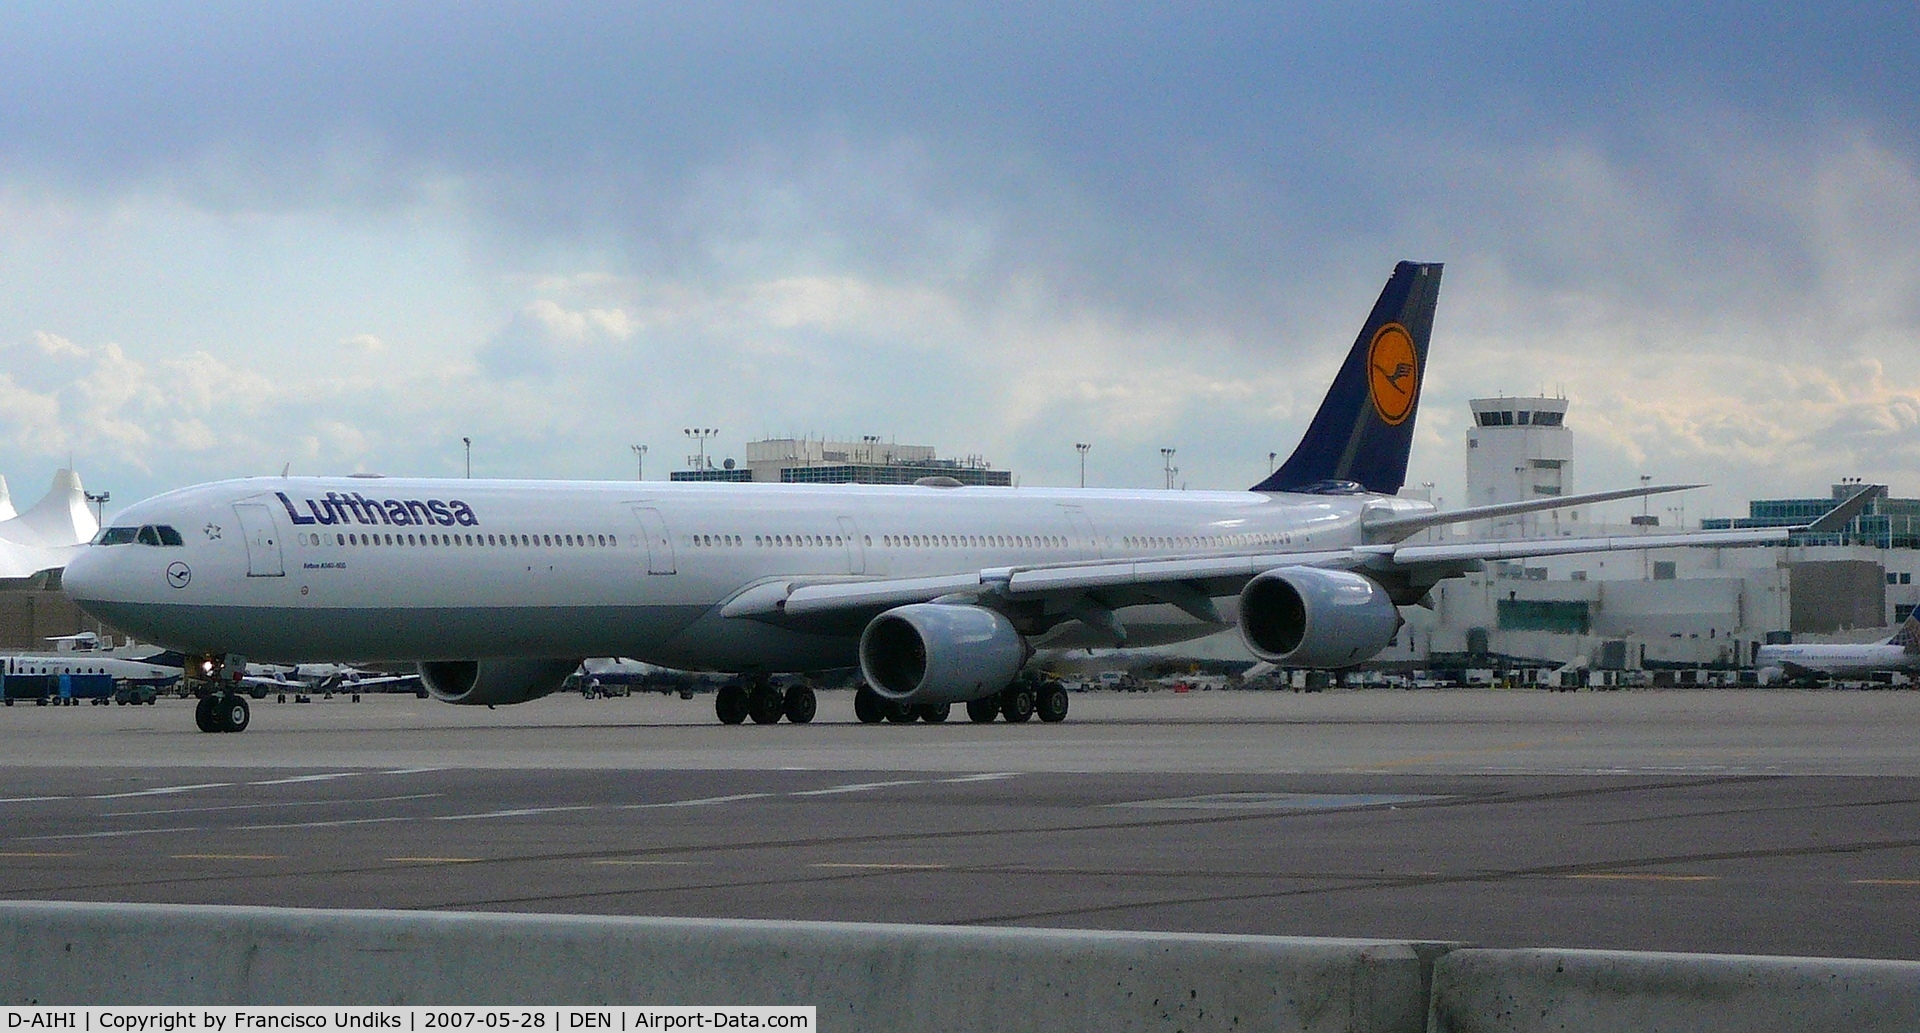 D-AIHI, 2004 Airbus A340-642 C/N 569, Lufthansa taxiing on Bravo Sierra eastbound over VSR.